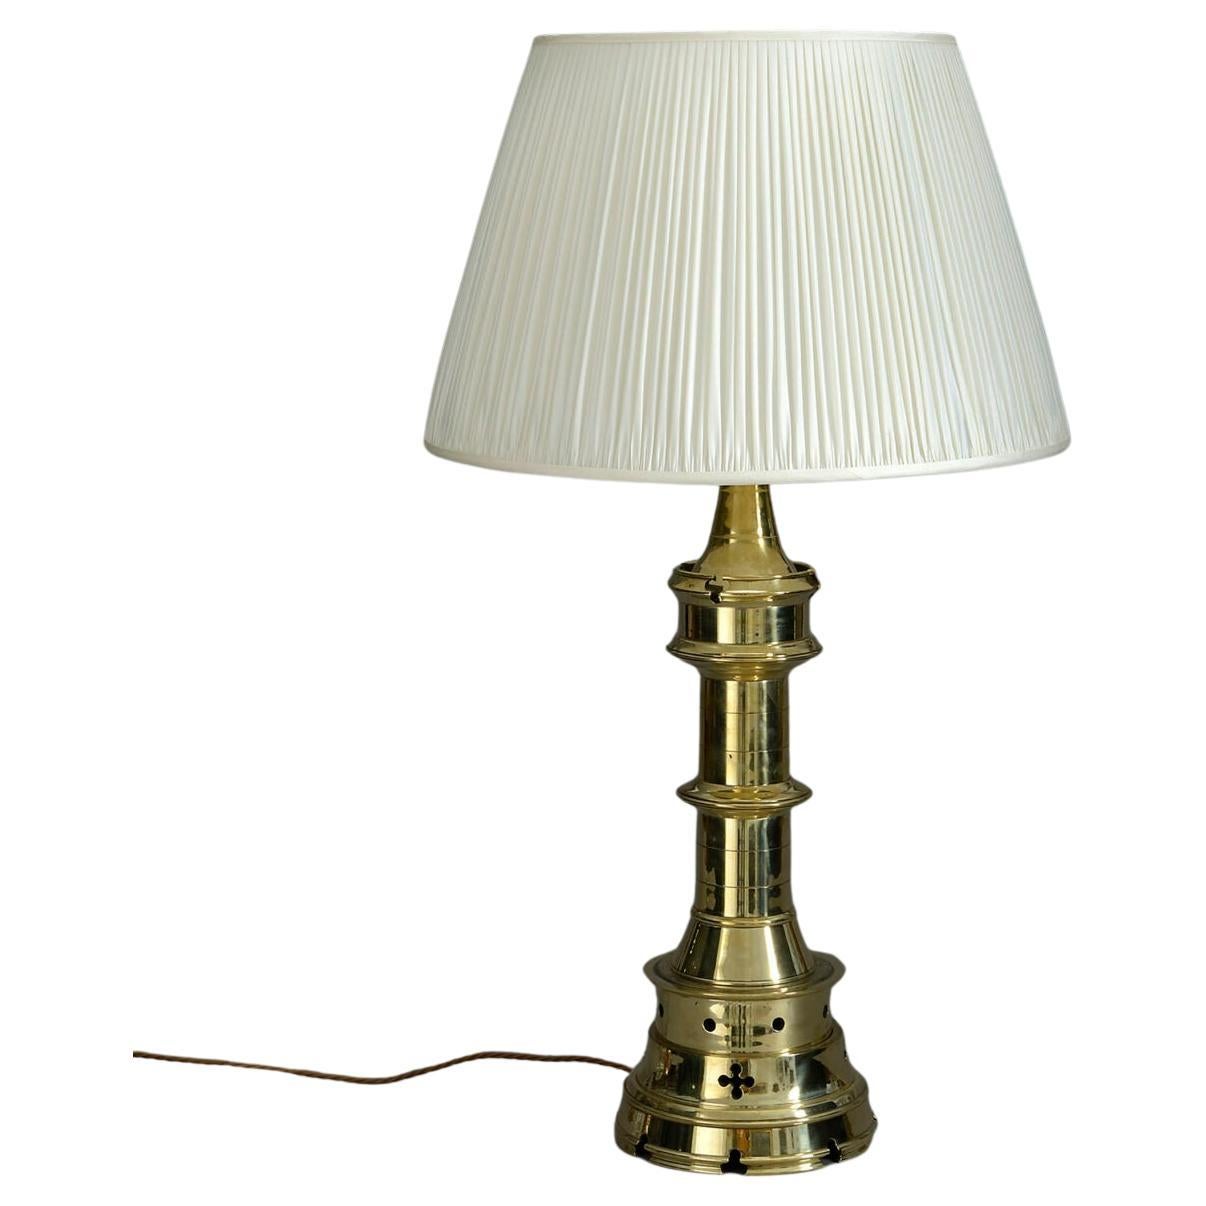 Large Early 20th Century Polished Brass Lighthouse Lamp For Sale